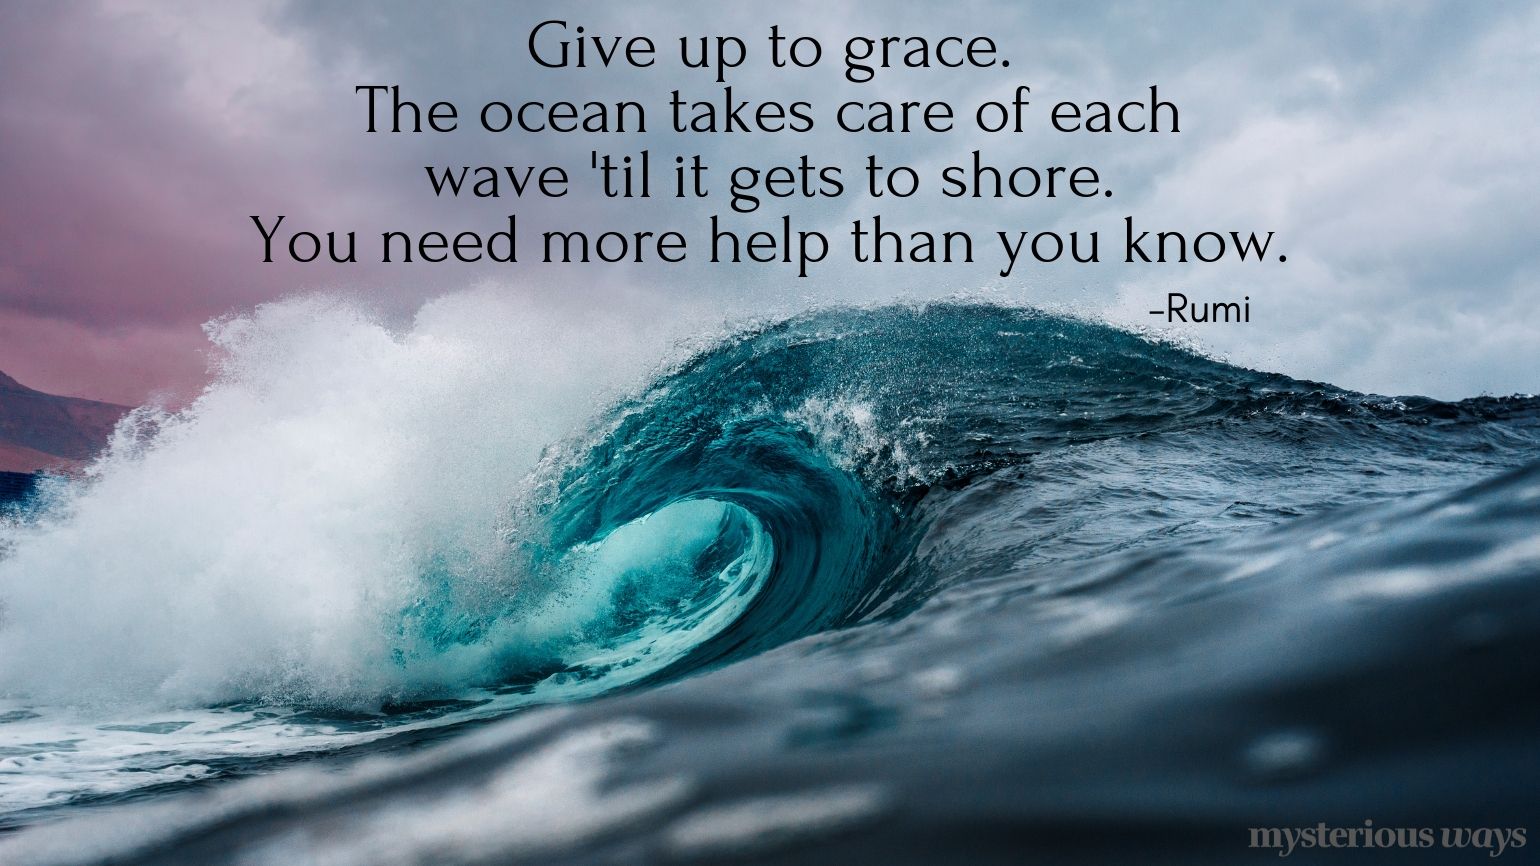 Give up to grace. The ocean takes care of each wave 'til it gets to shore. You need more help than you know. —Rumi